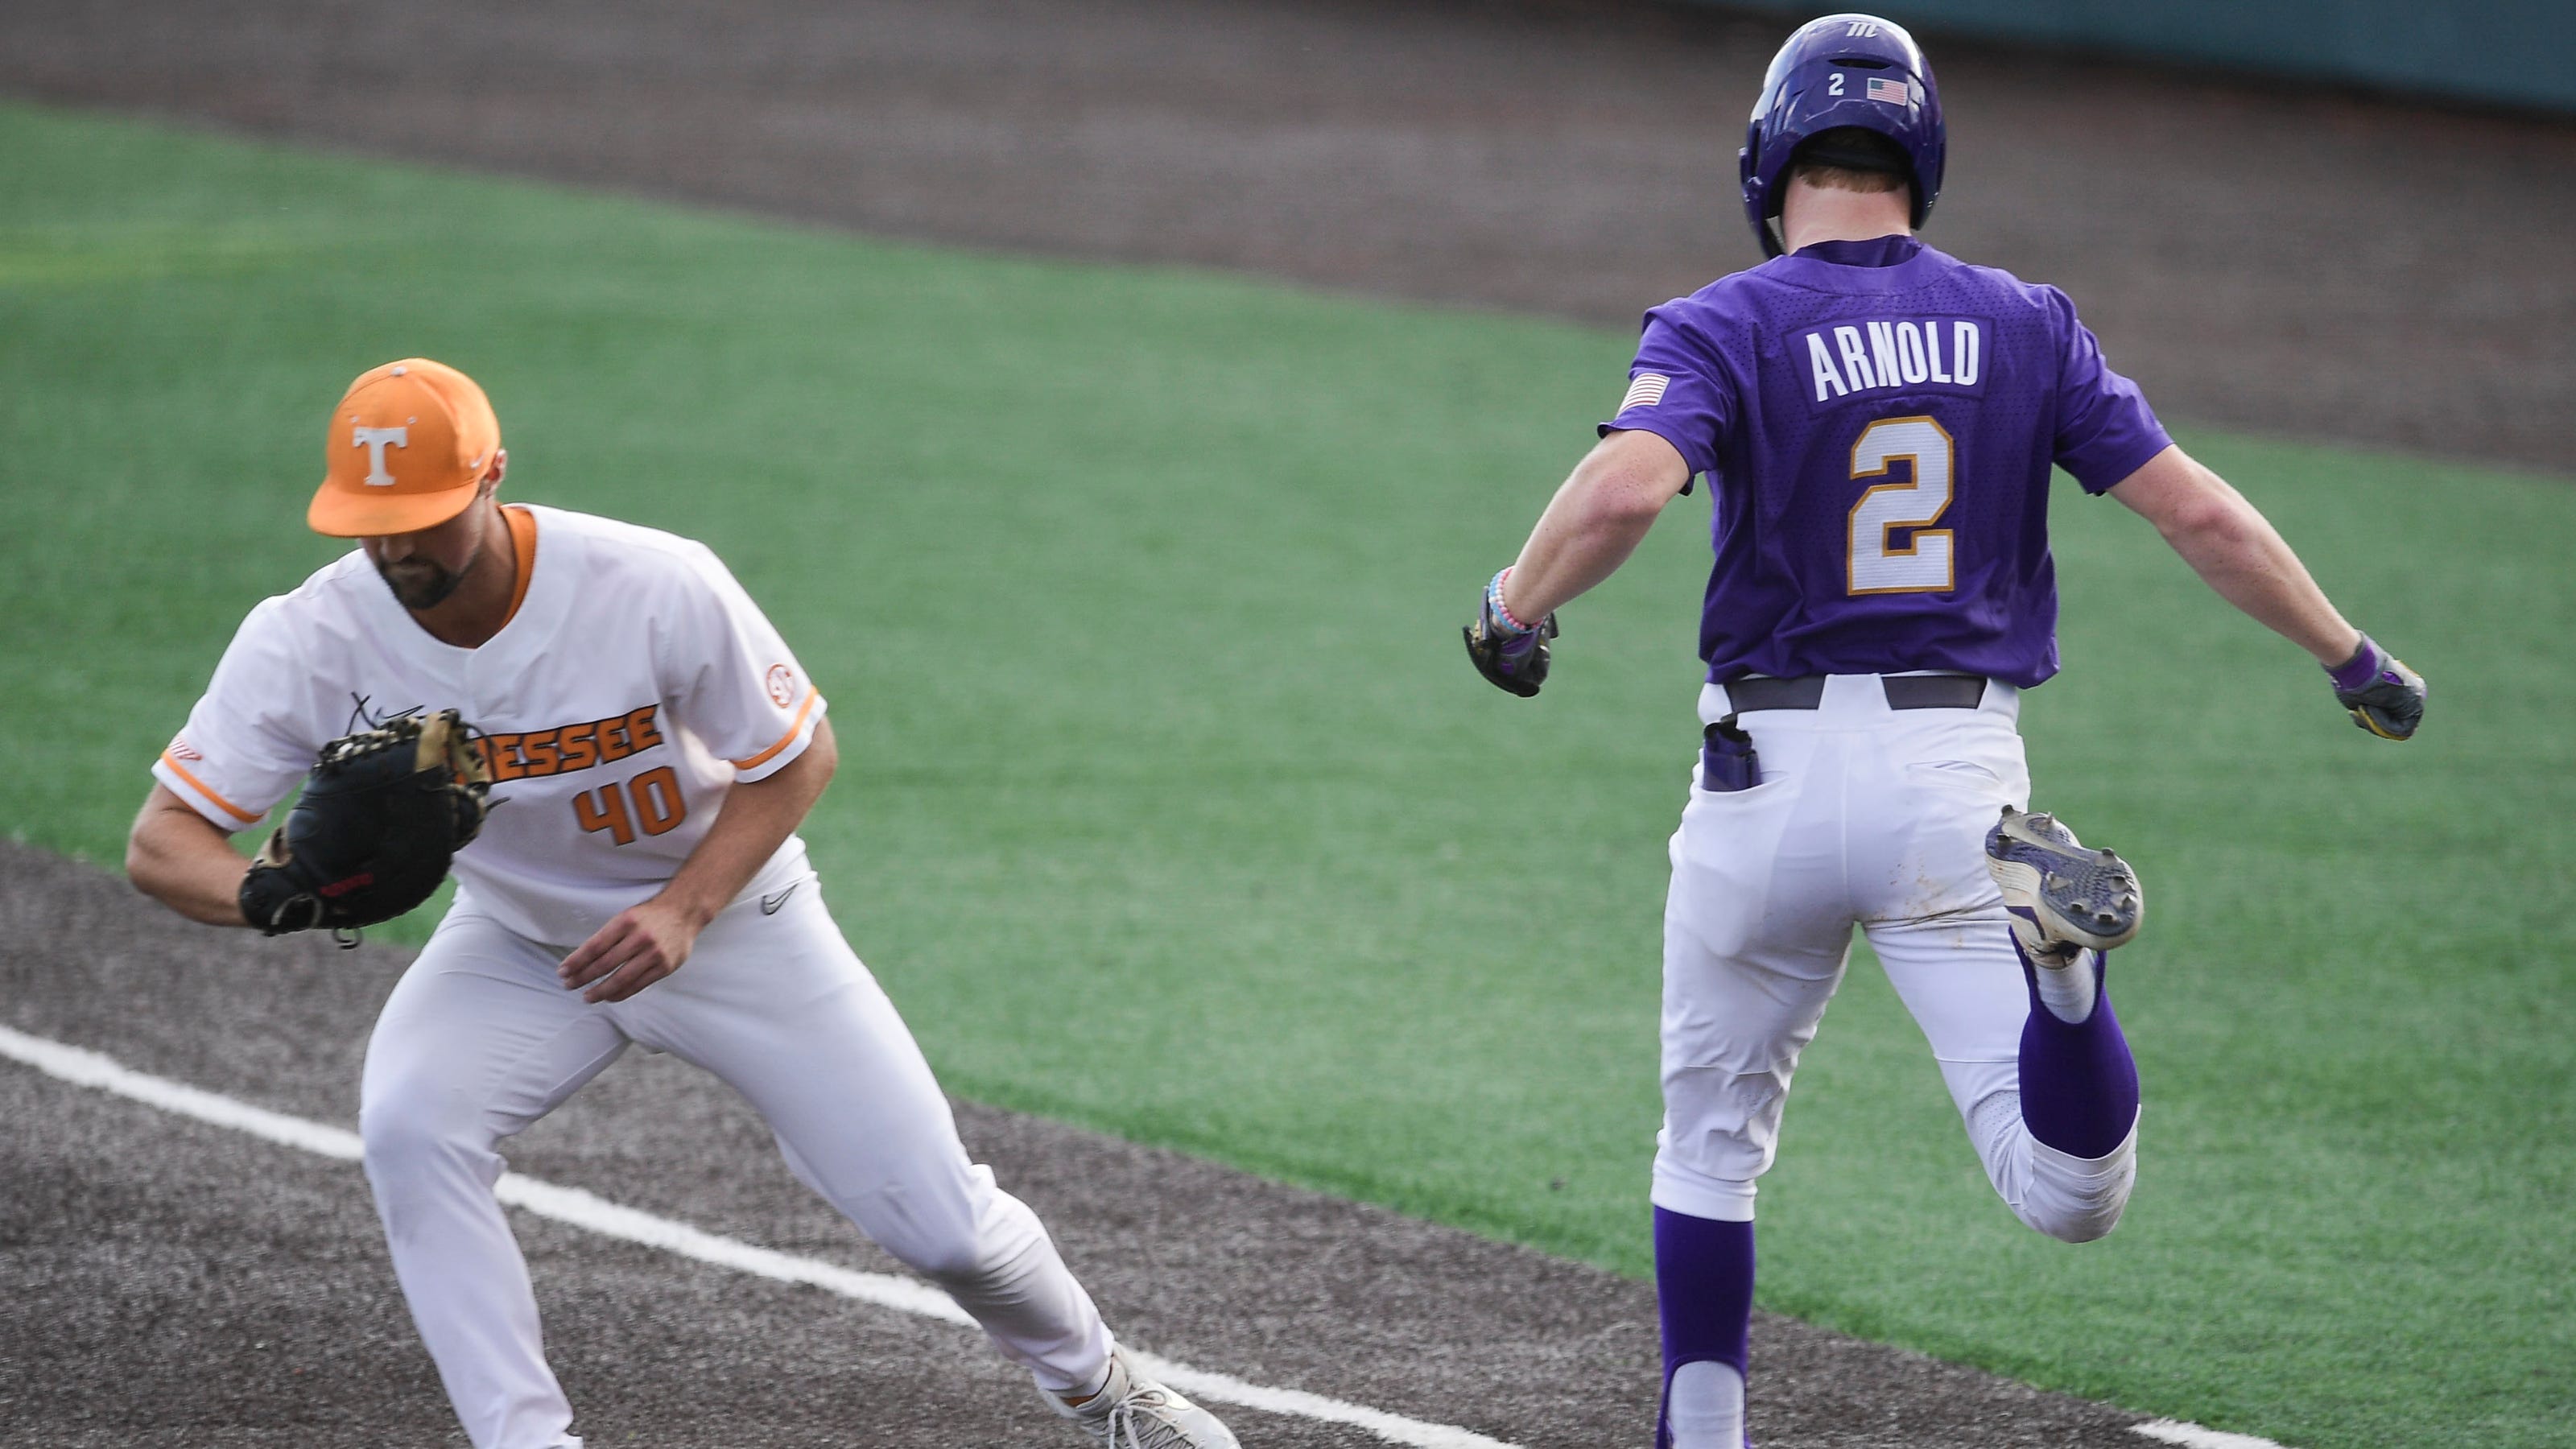 Tennessee vs. LSU baseball video highlights, score in Saturday's game